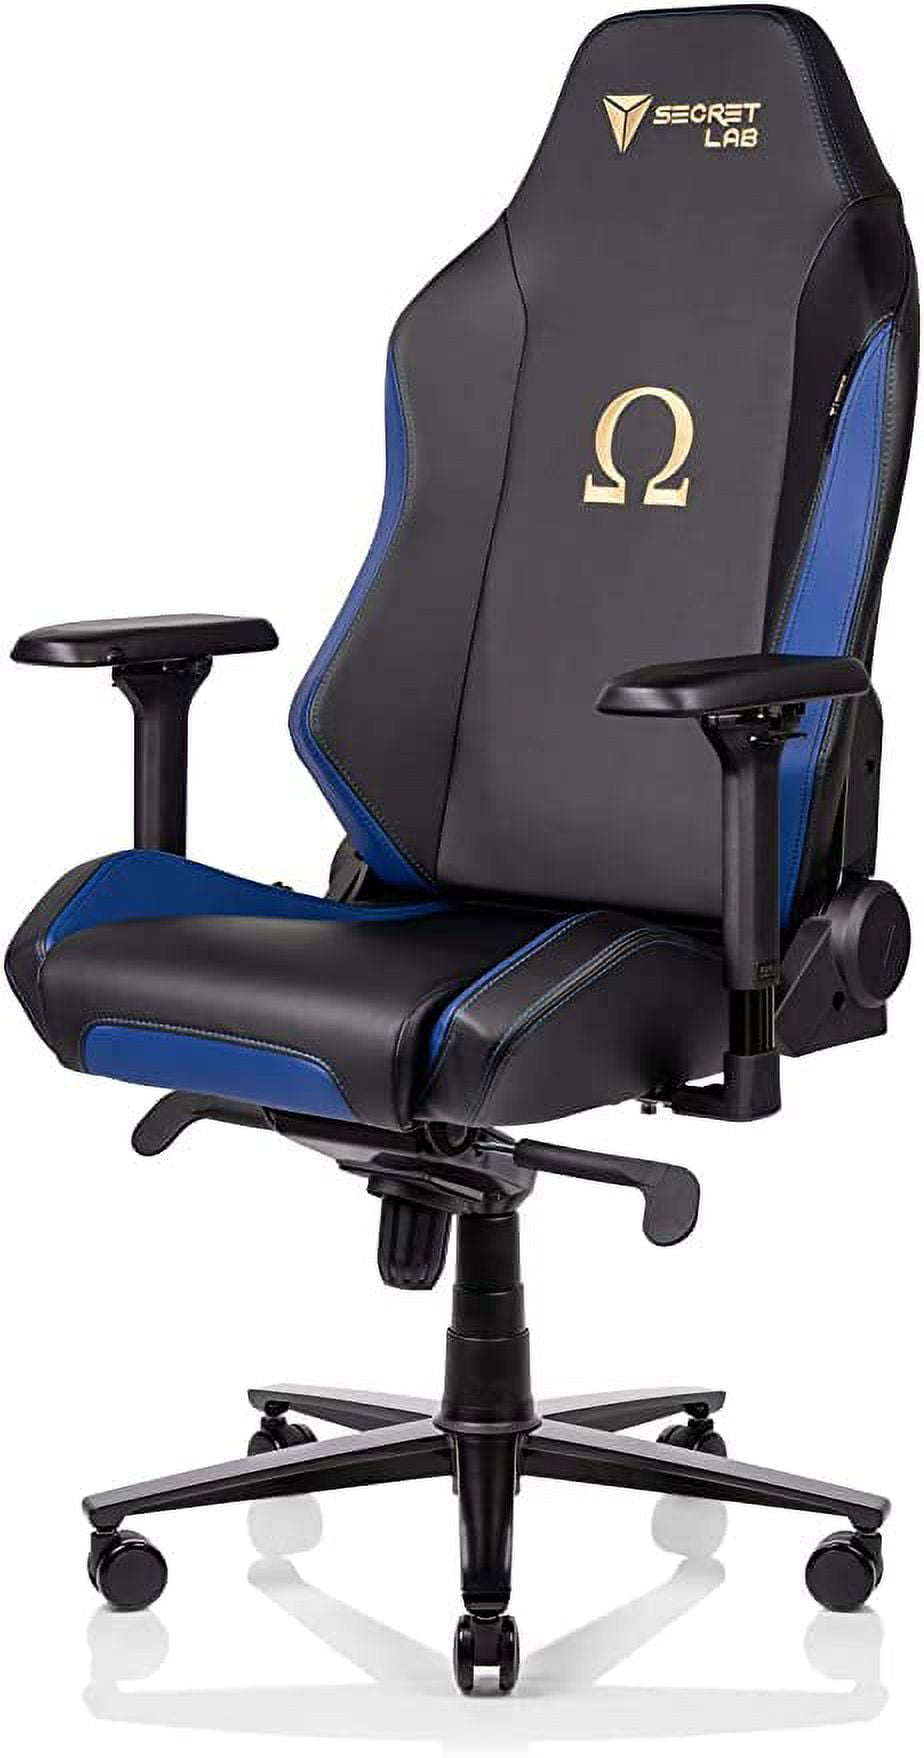 Secretlab Omega 2020 review: stylish gaming chair range is well